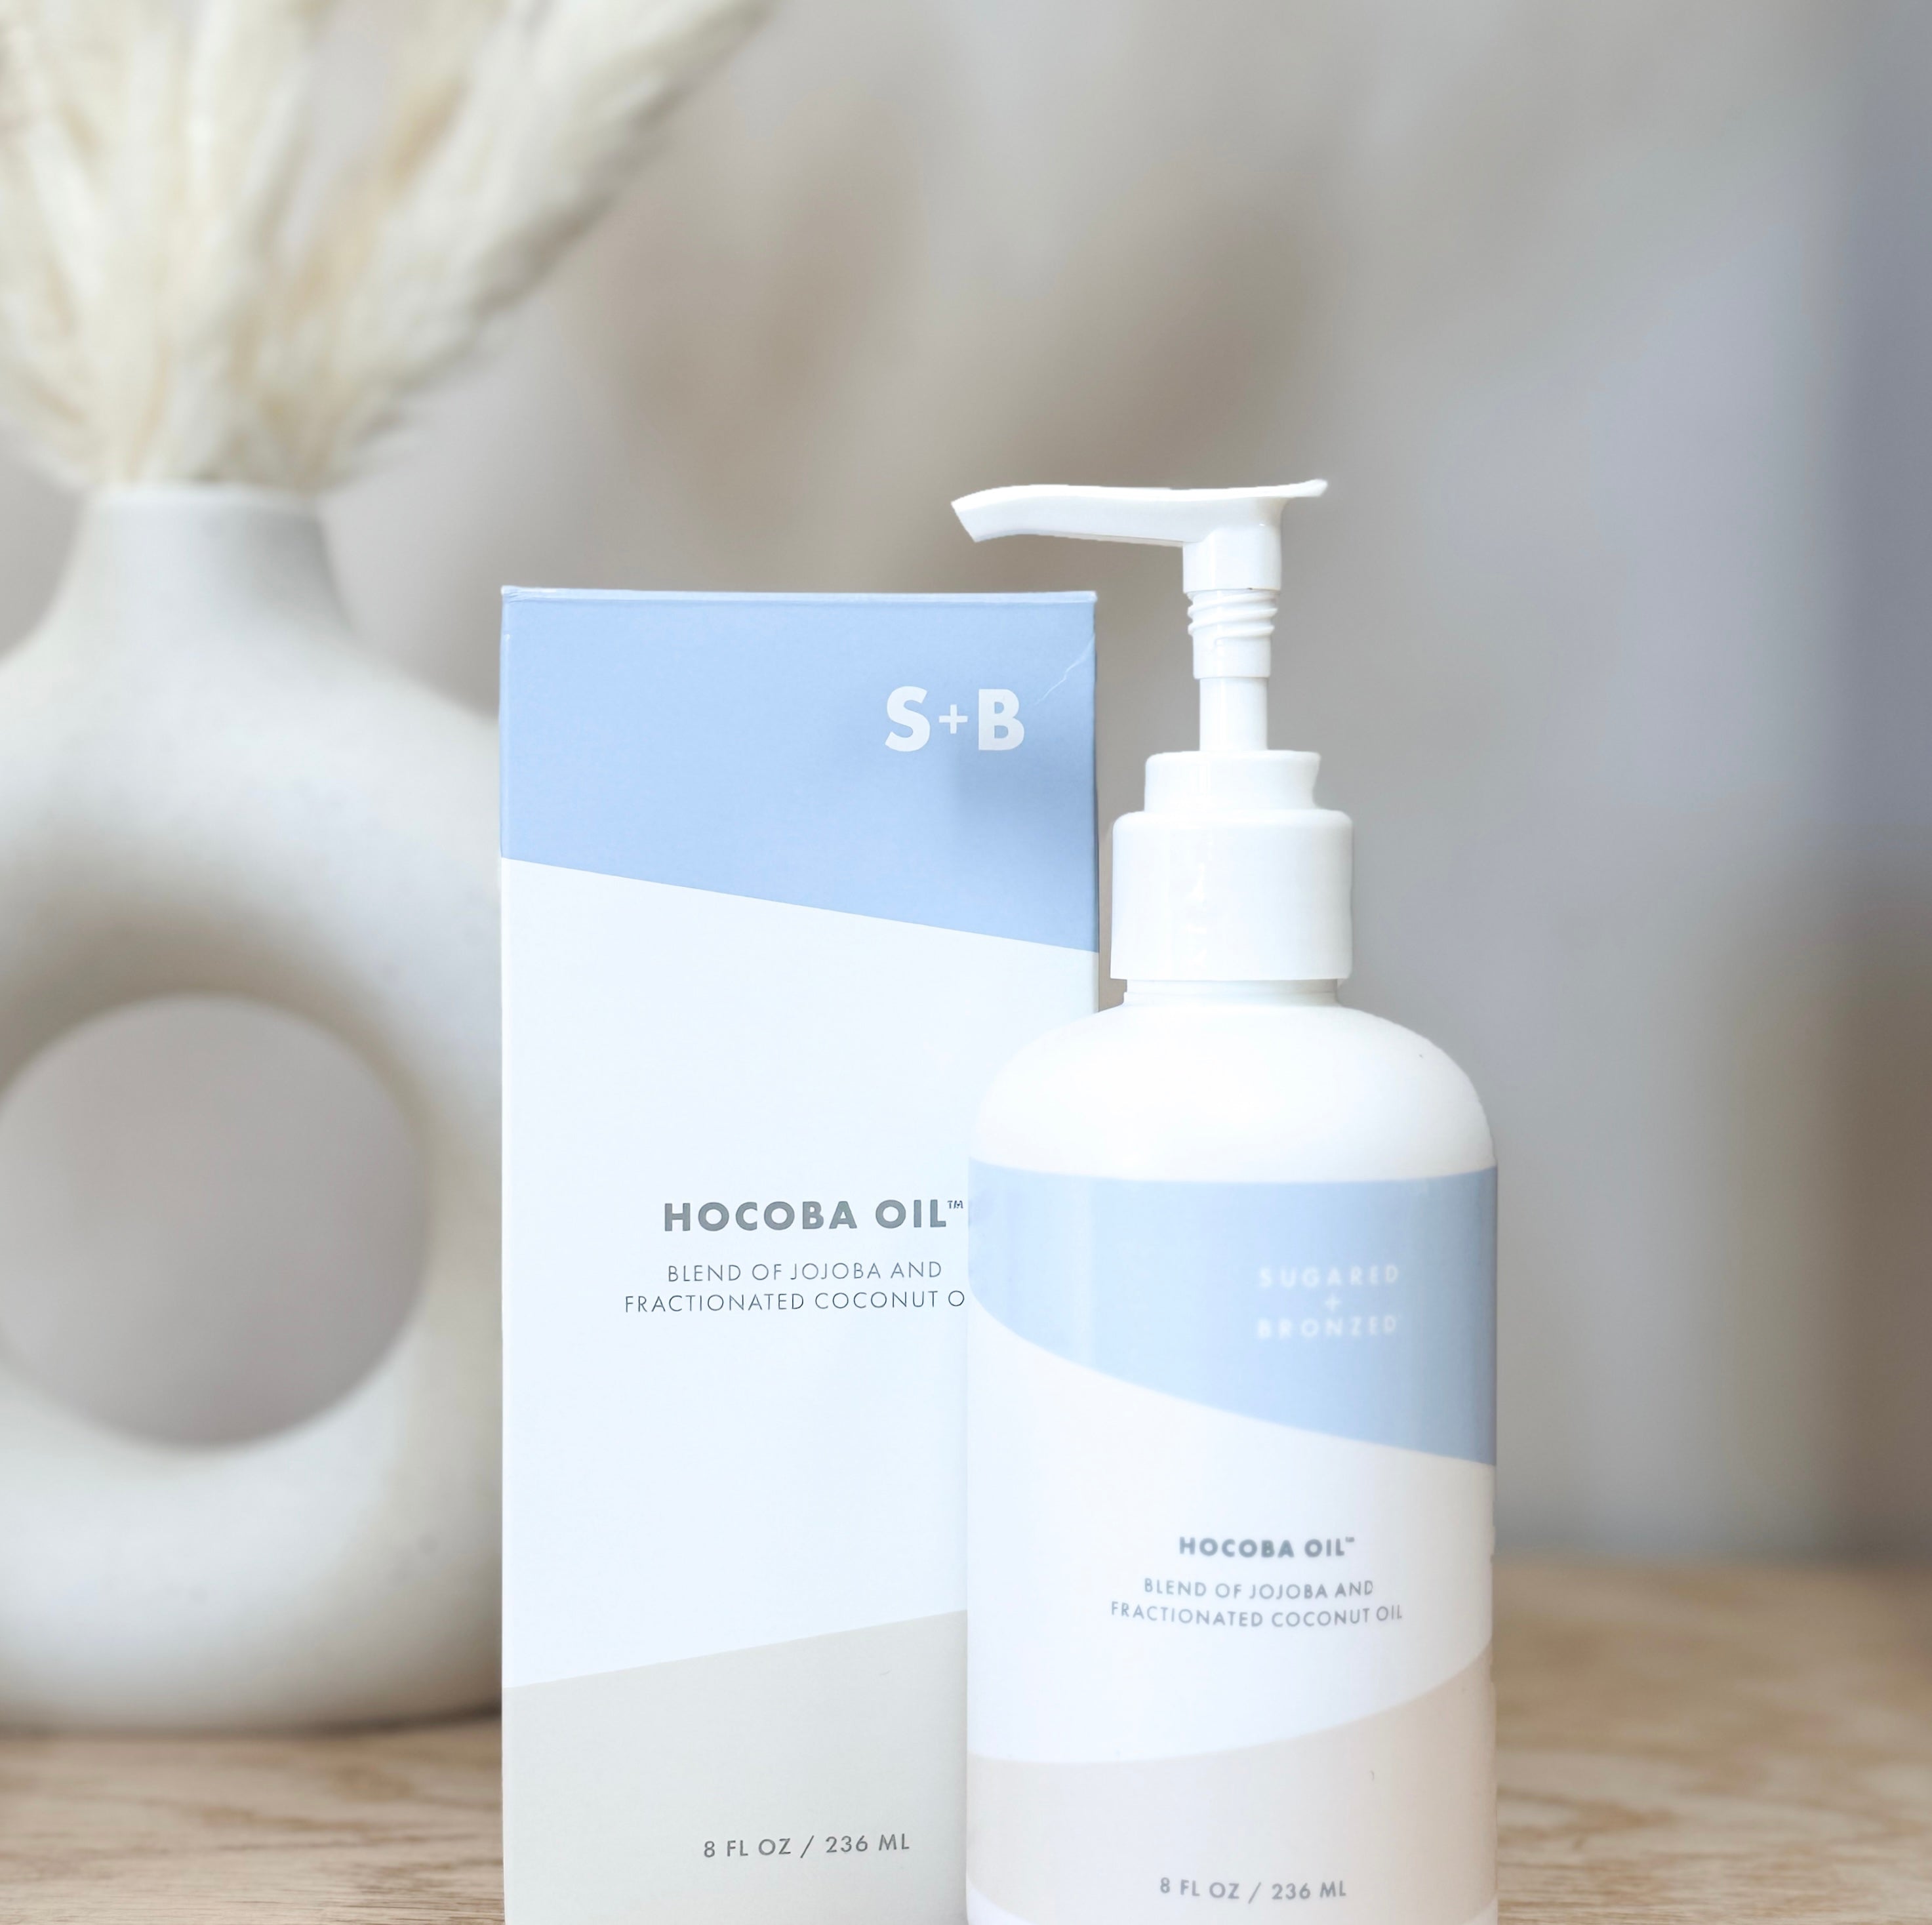 Hocoba Oil: The best duo in a bottle (hello soft skin)